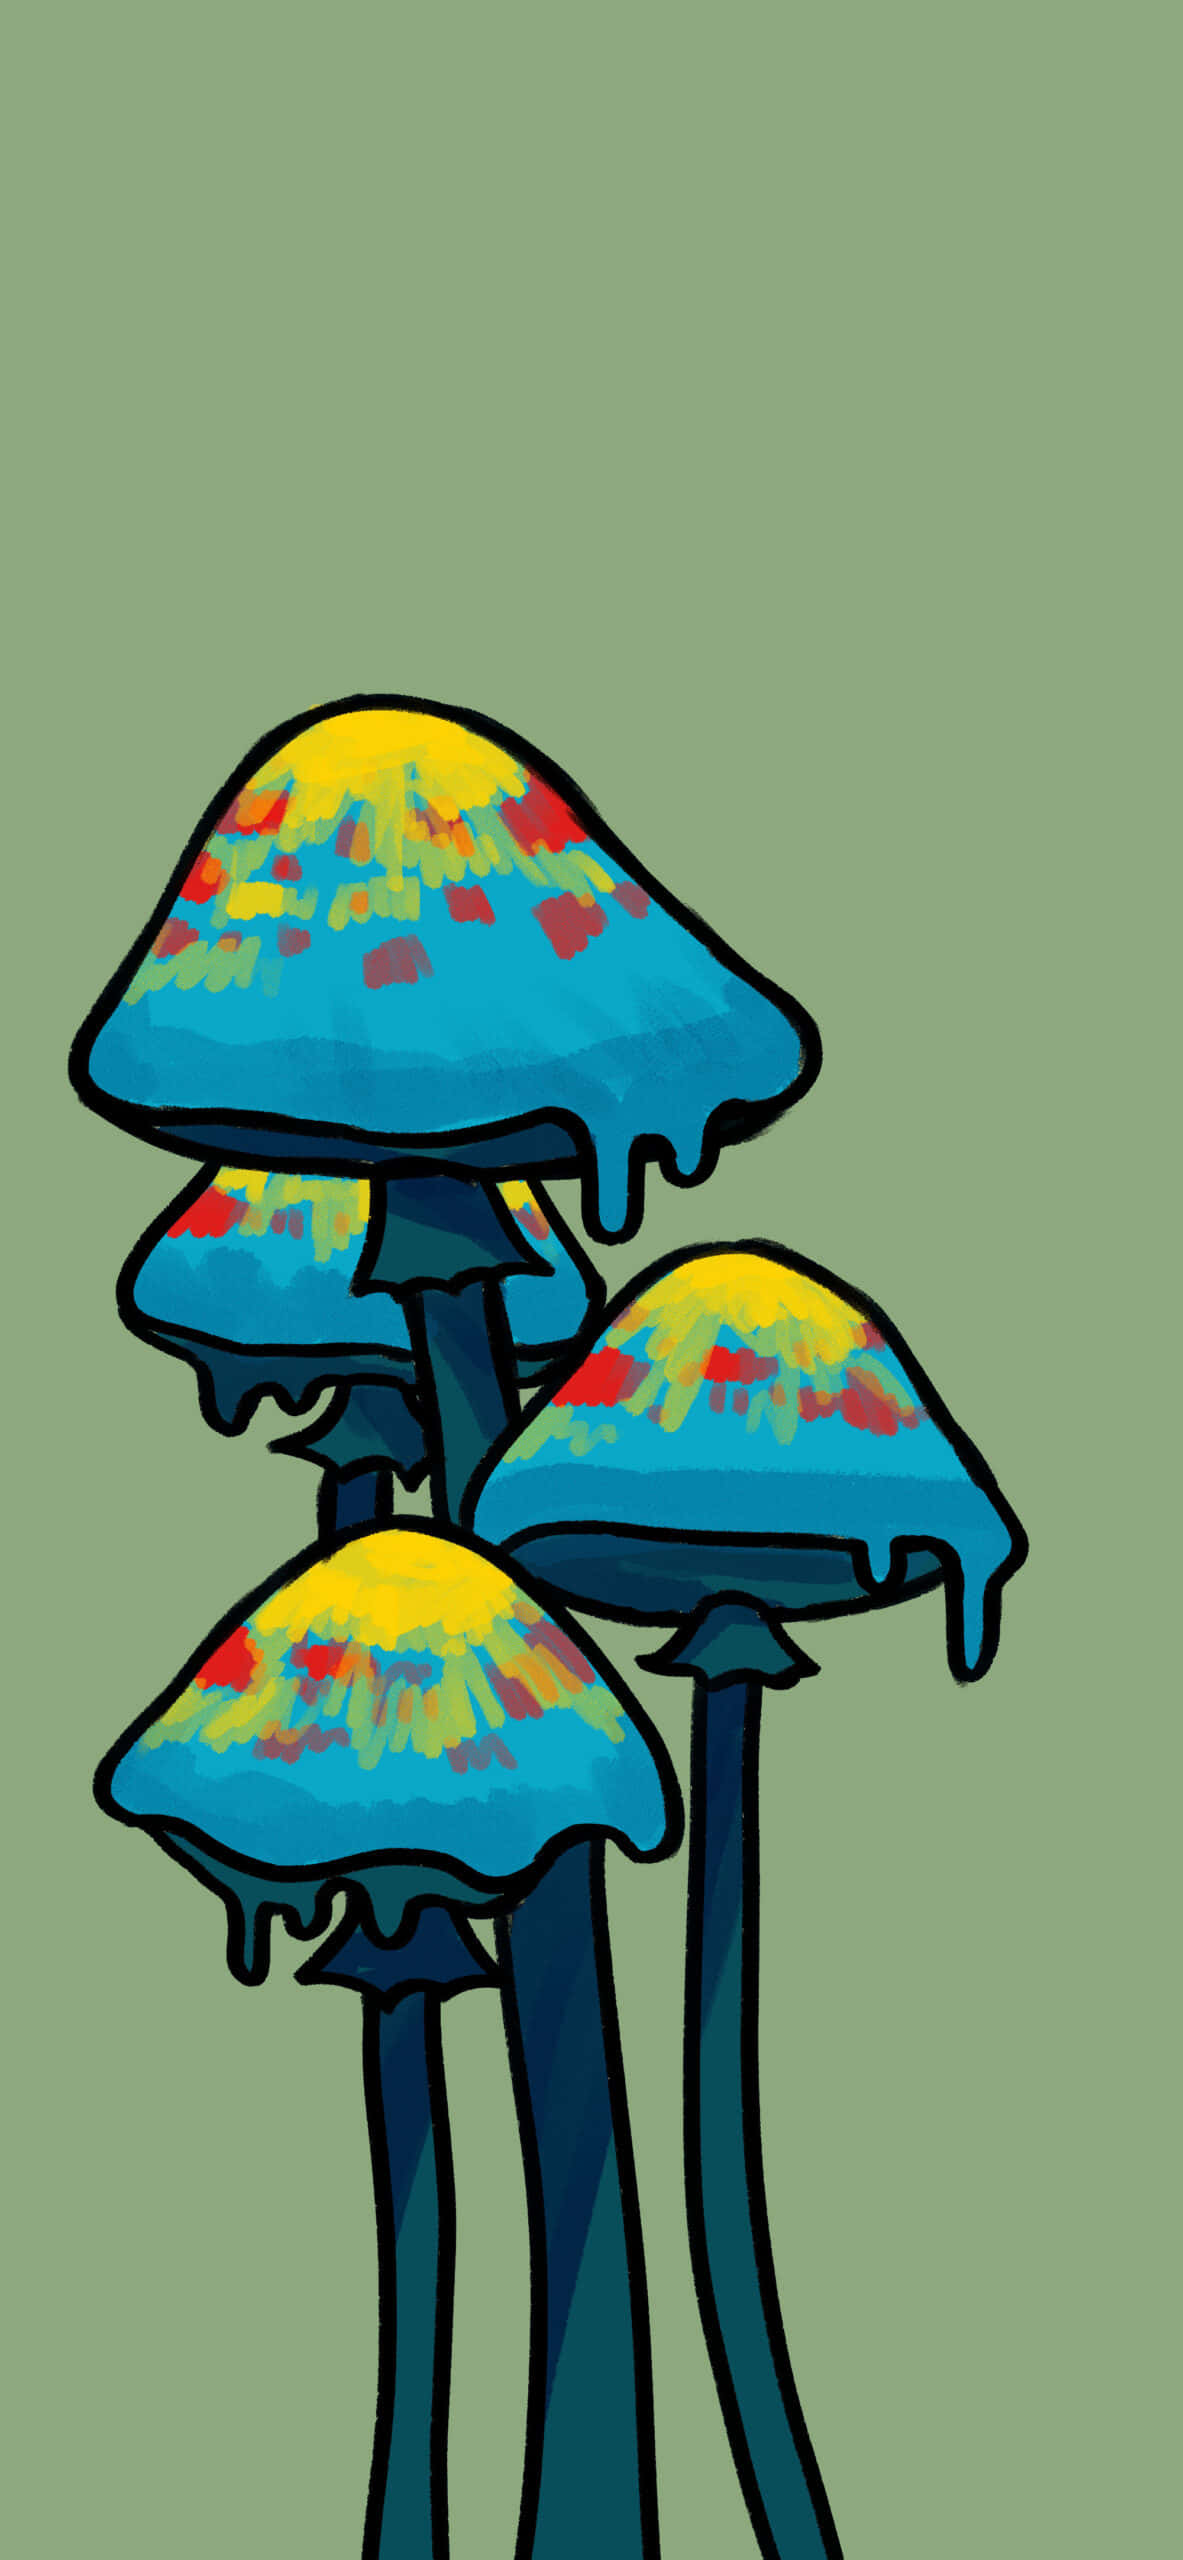 Enjoy the journey with this psychedelic trippy mushroom Wallpaper